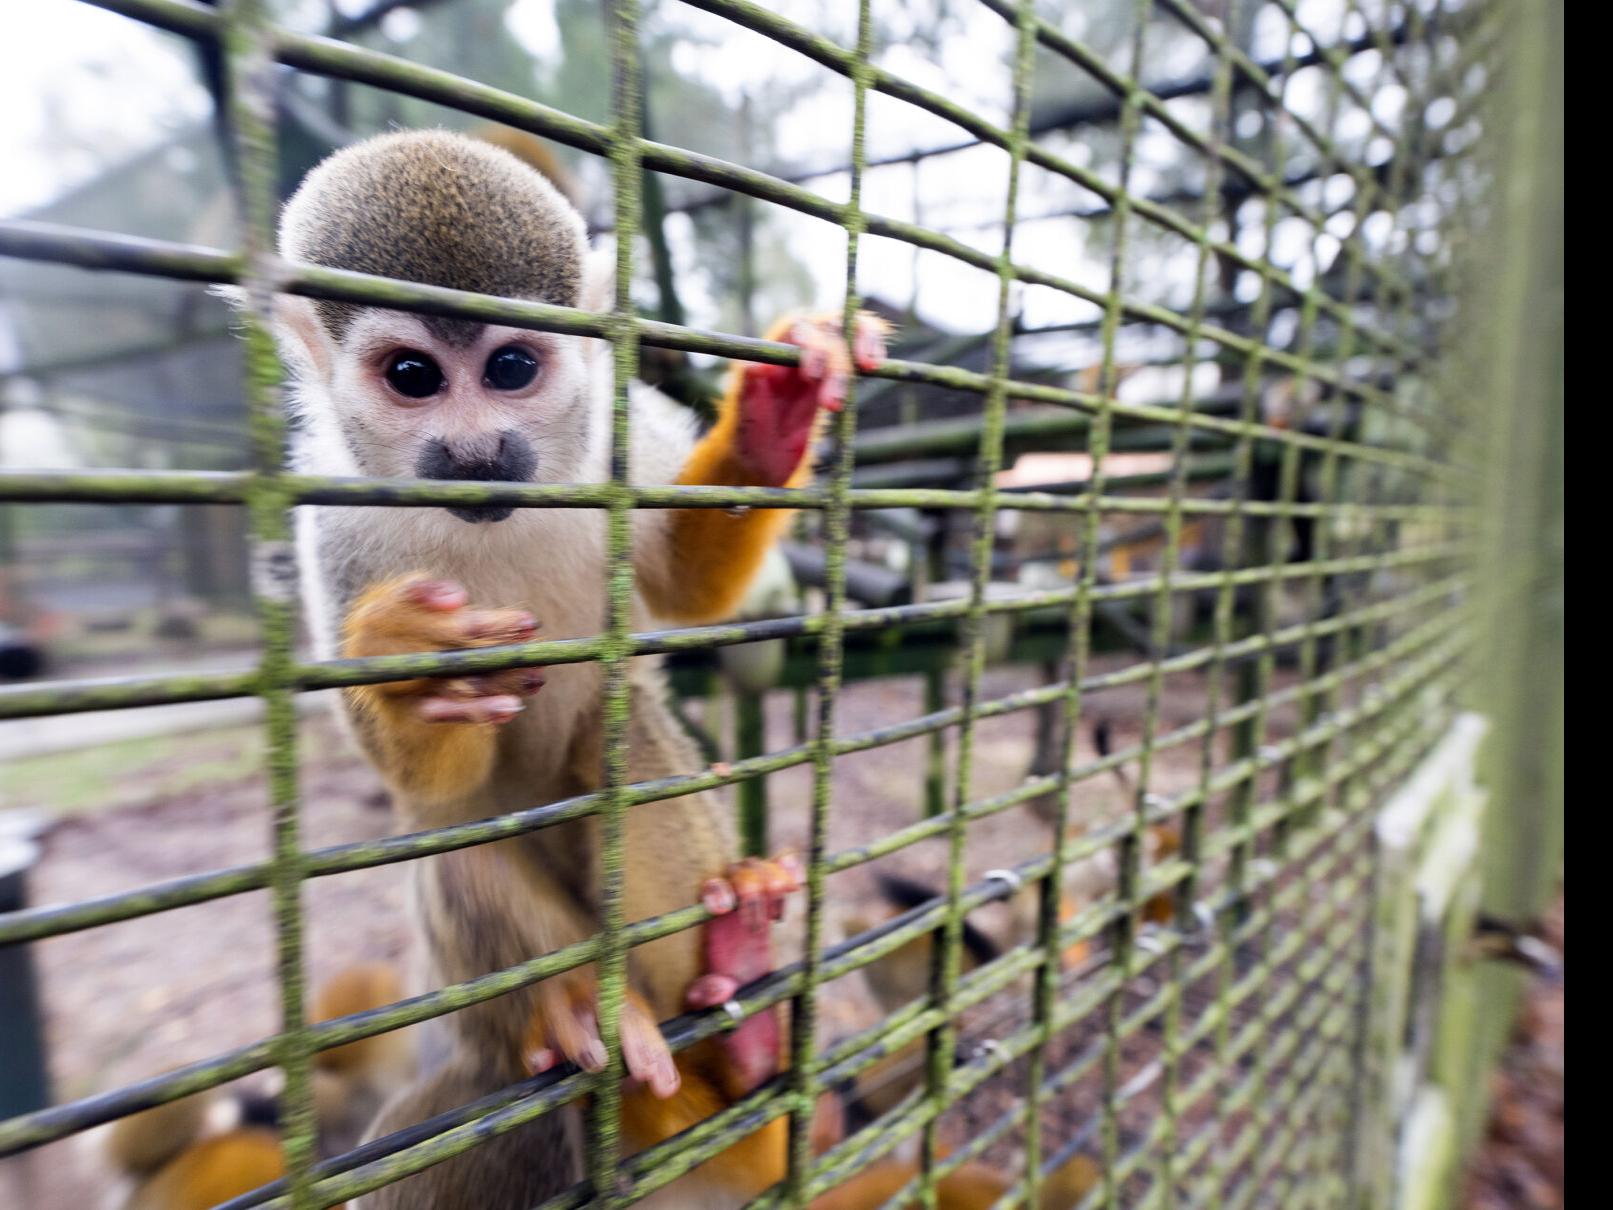 12 monkeys missing from Louisiana zoo as search for thief, monkey